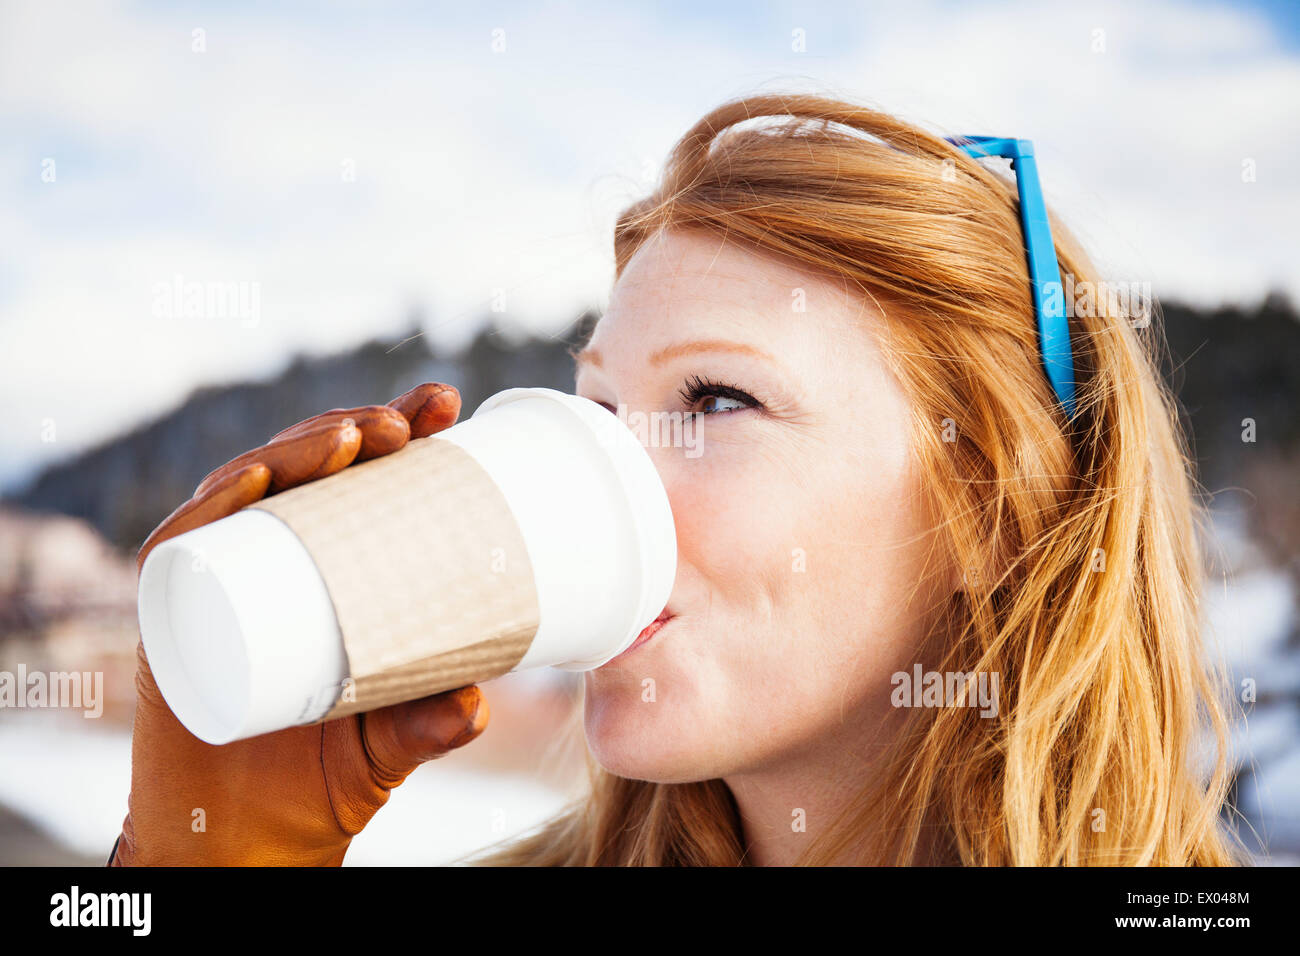 Close up of mid adult woman drinking takeaway coffee Stock Photo